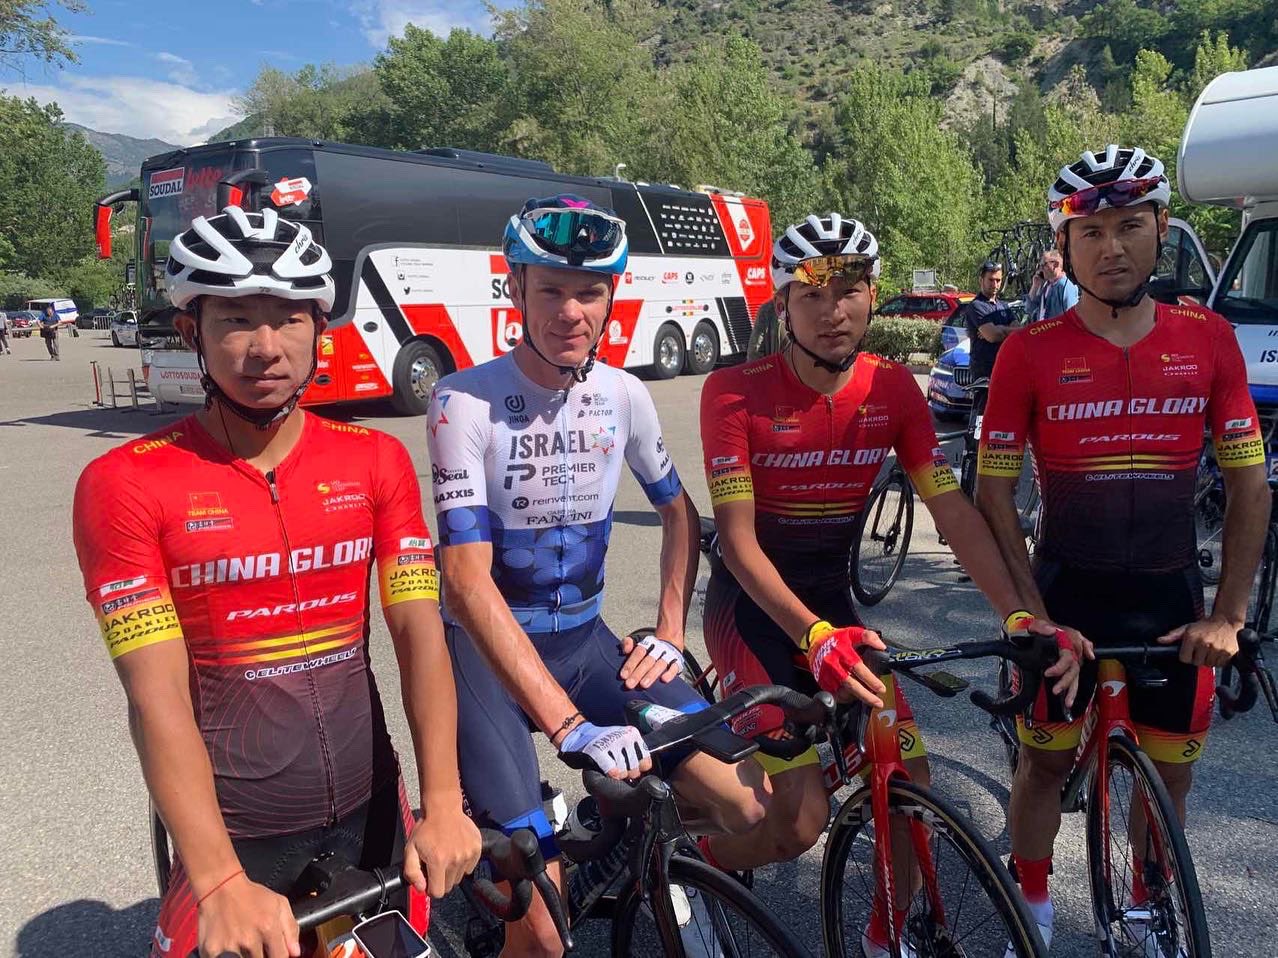 By standing here alongside Chris Froome at the start of the Mercan'Tour Classic, China Glory pilots make the connection between the Chinese project and the Israeli Israeli Premier-Tech project / Source: China Glory 